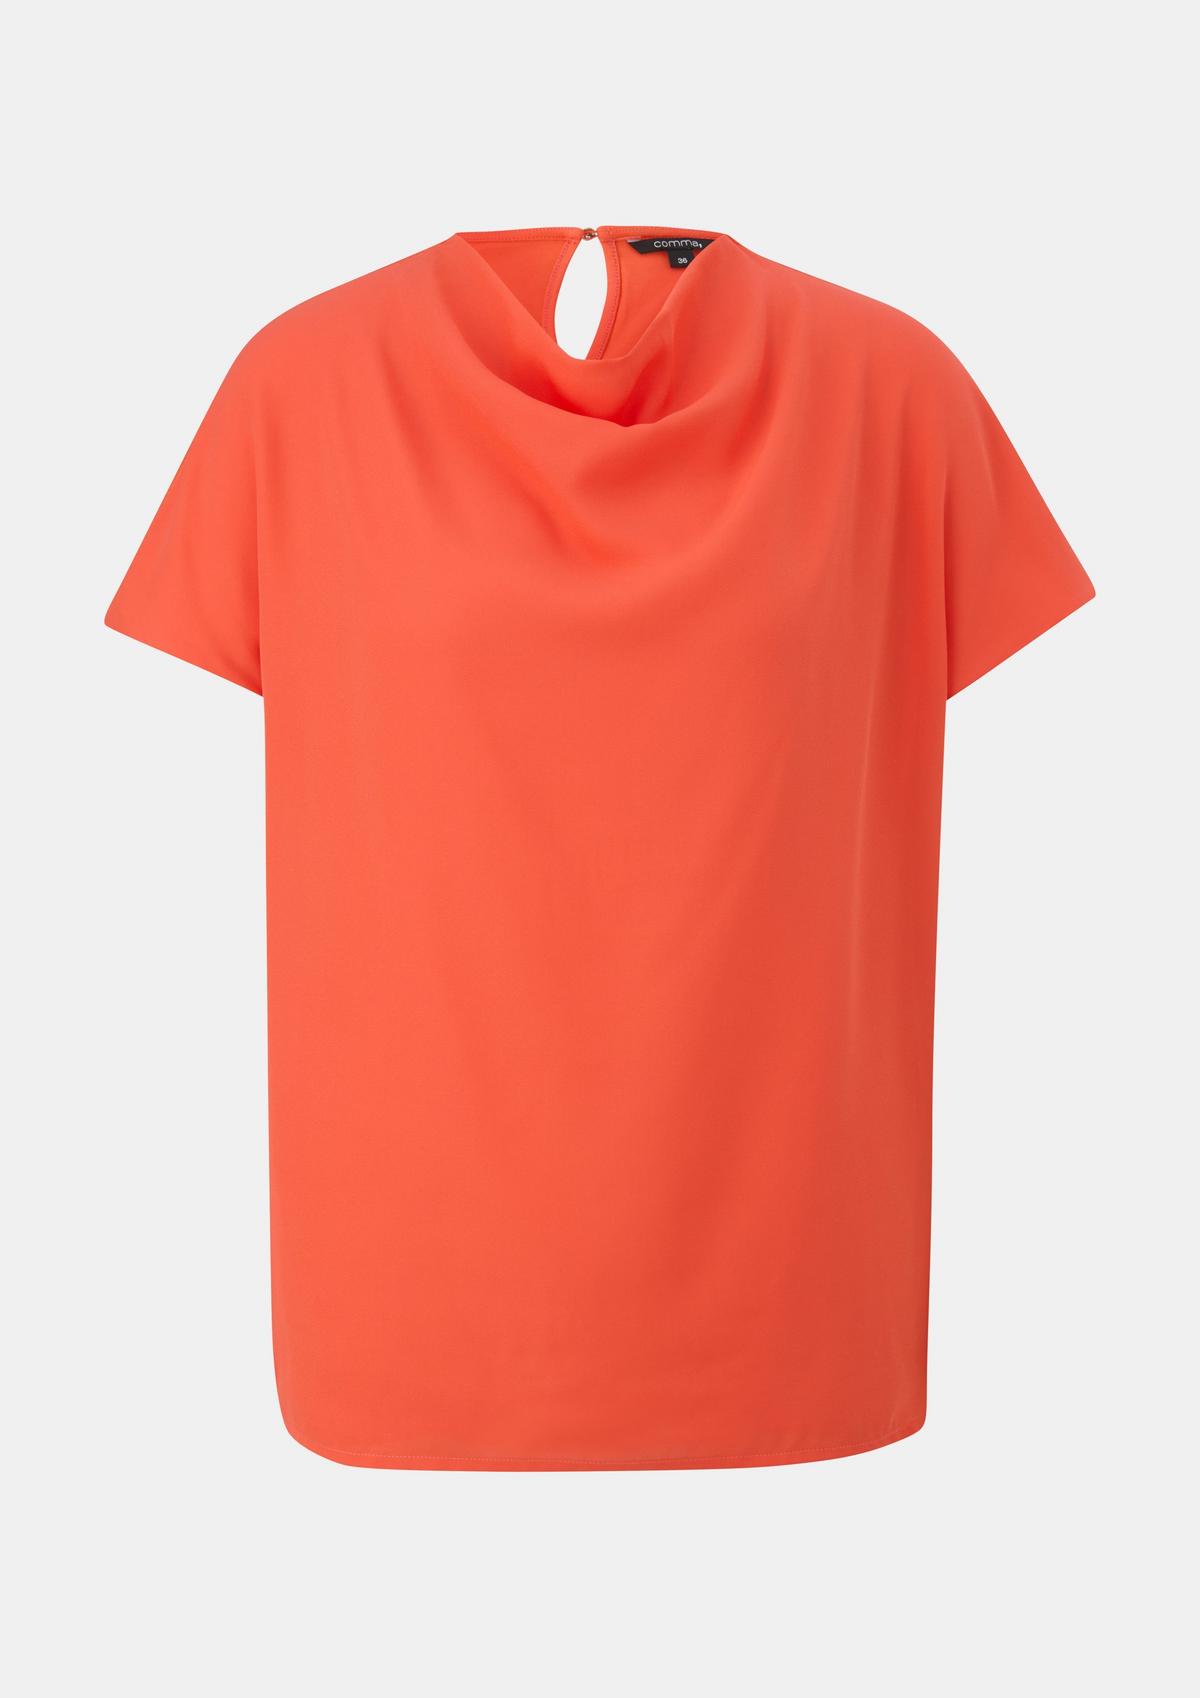 Shirts & Tops Women for | Comma